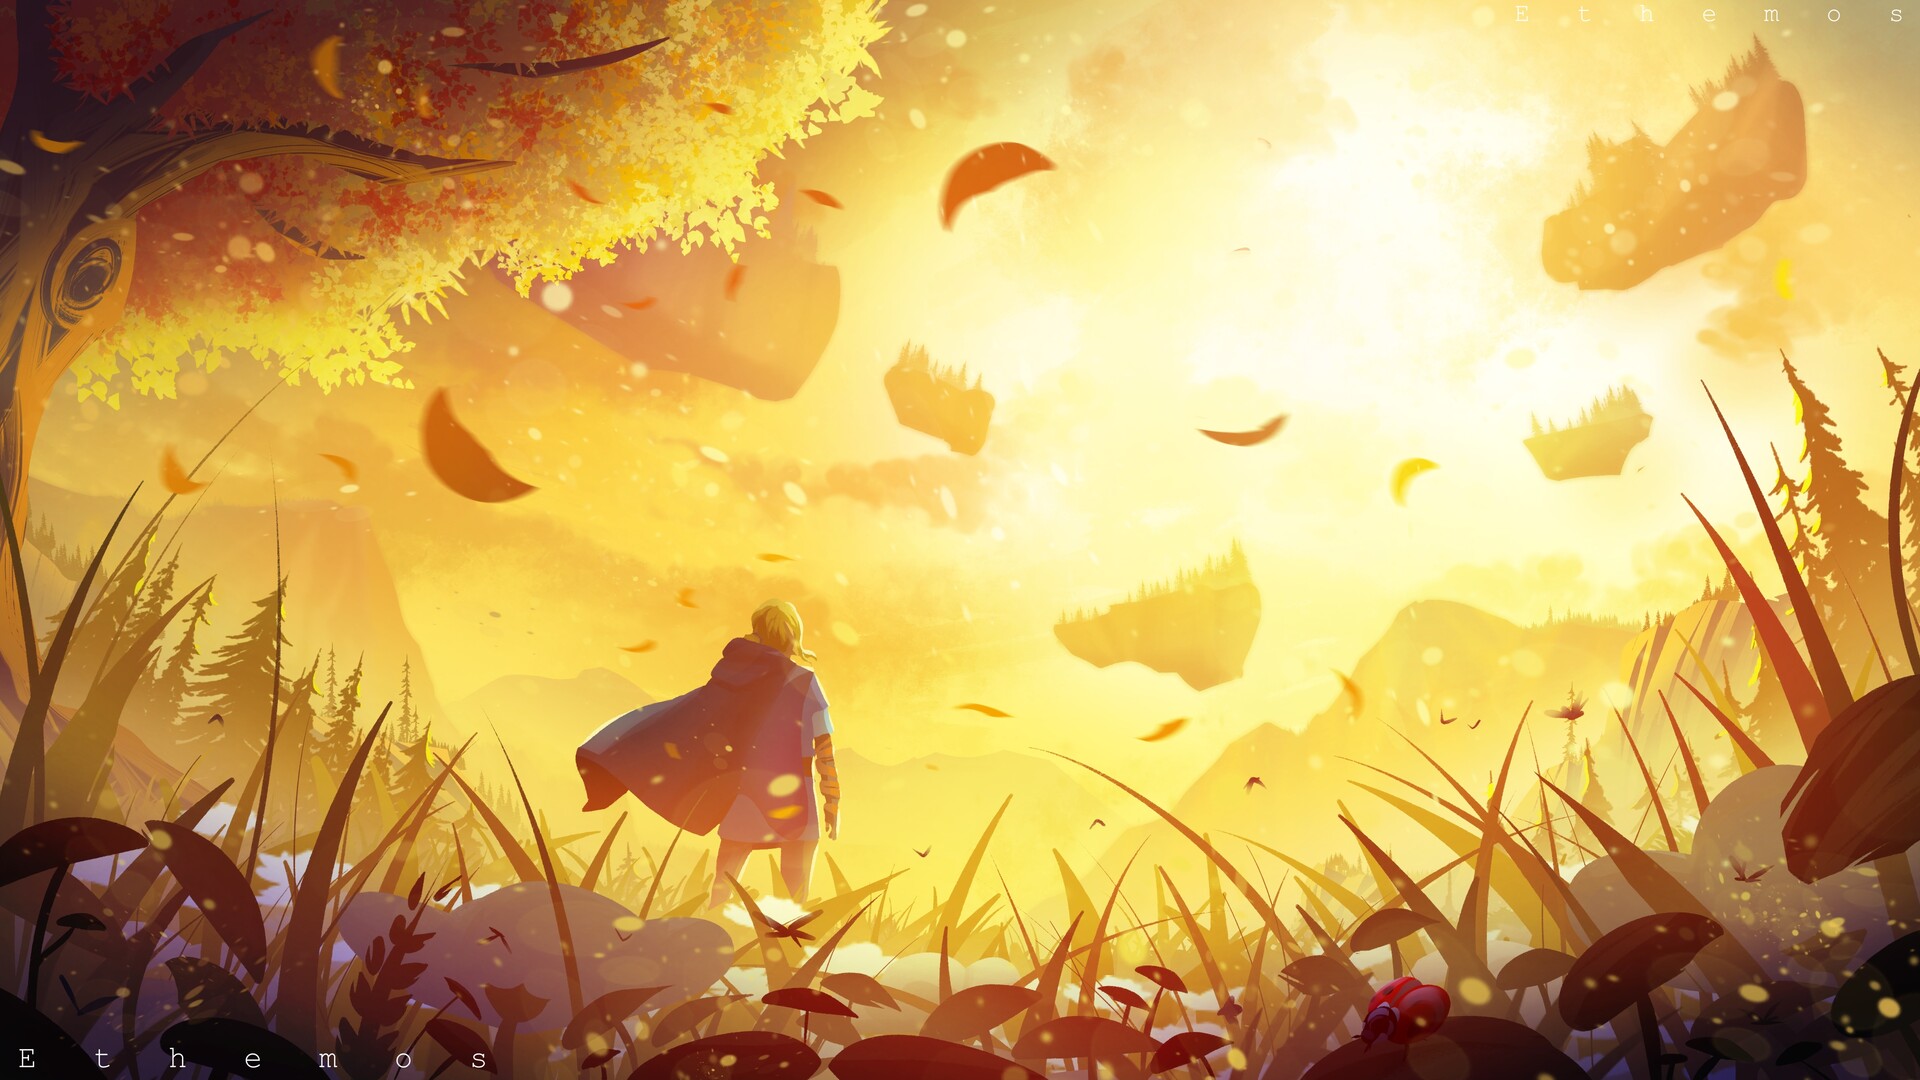 The Legend of Zelda: Tears of the Kingdom HD Wallpaper and Background